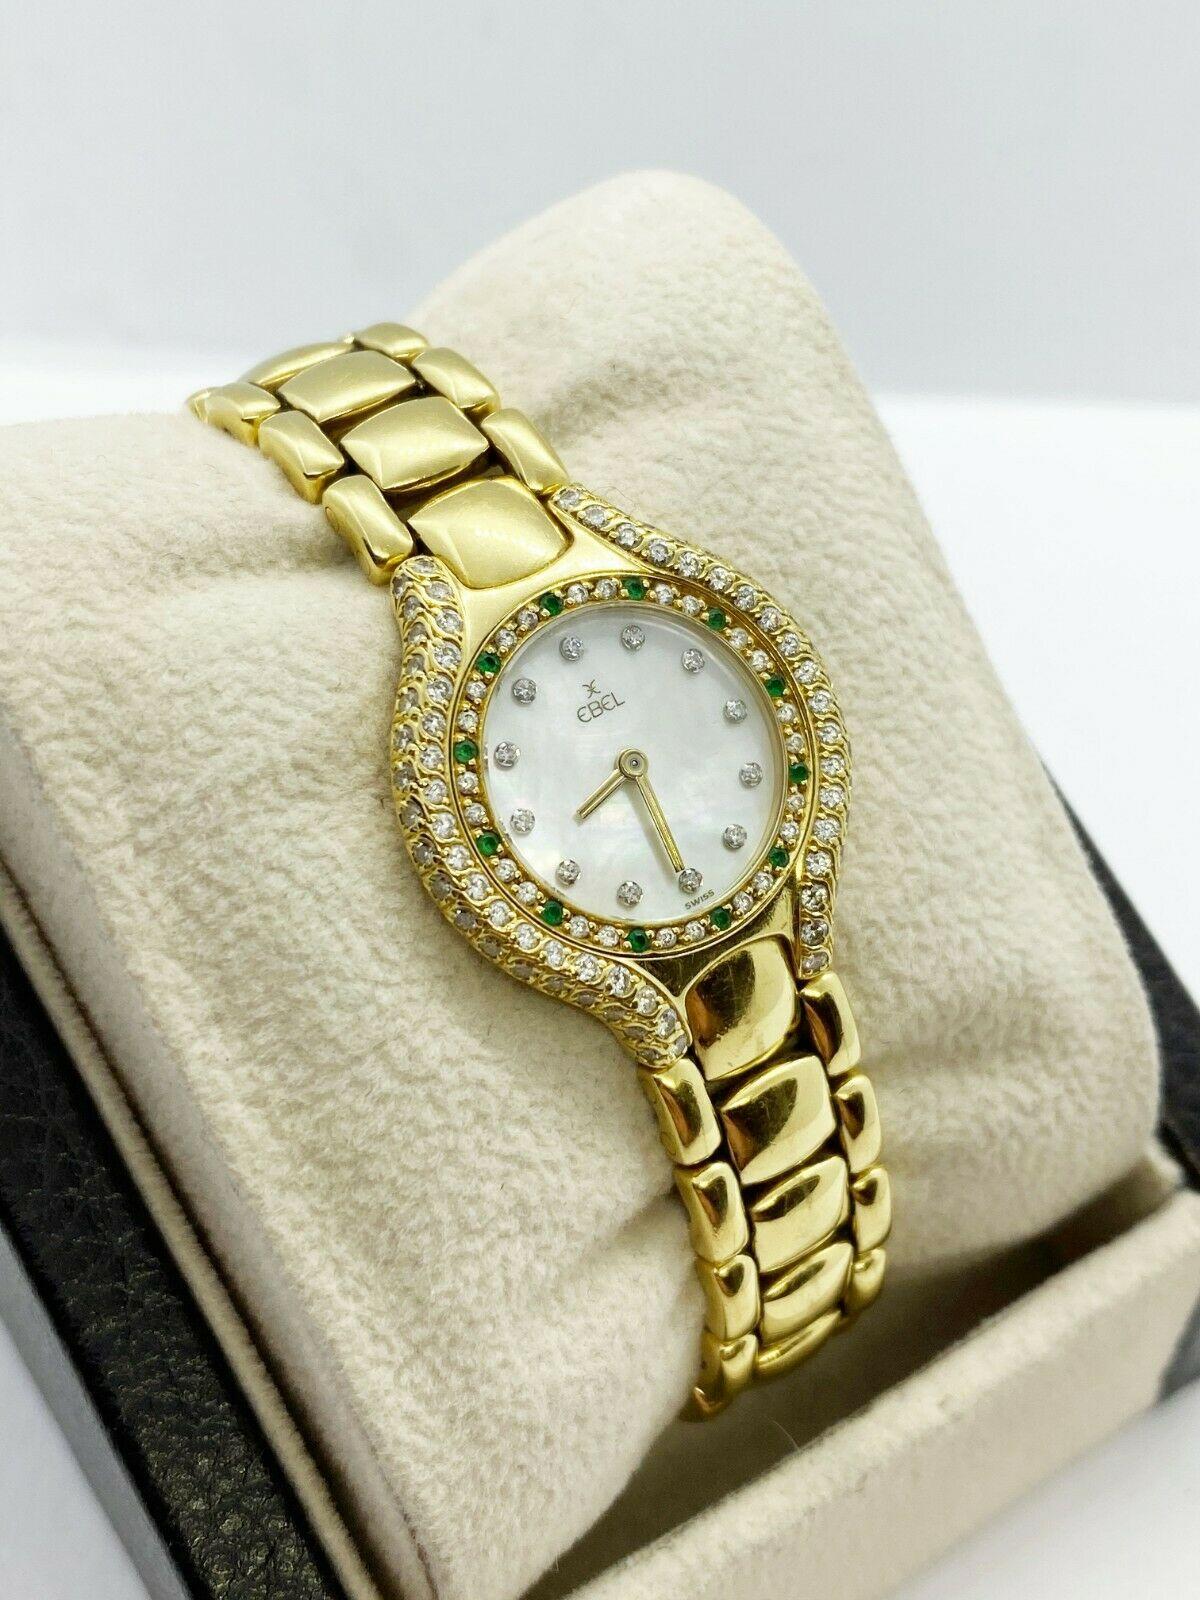 Style Number: 866940

Model: Beluga 

Case Material: 18k Yellow Gold 

Band: 18k Yellow Gold

Bezel:  Diamond Emerald 18K Yellow Gold 

Dial: Mother of Pearl Diamond Dial

Case Size: 24mm

Includes: 
-Elegant Watch Box
-Certified Appraisal 
-1 Year